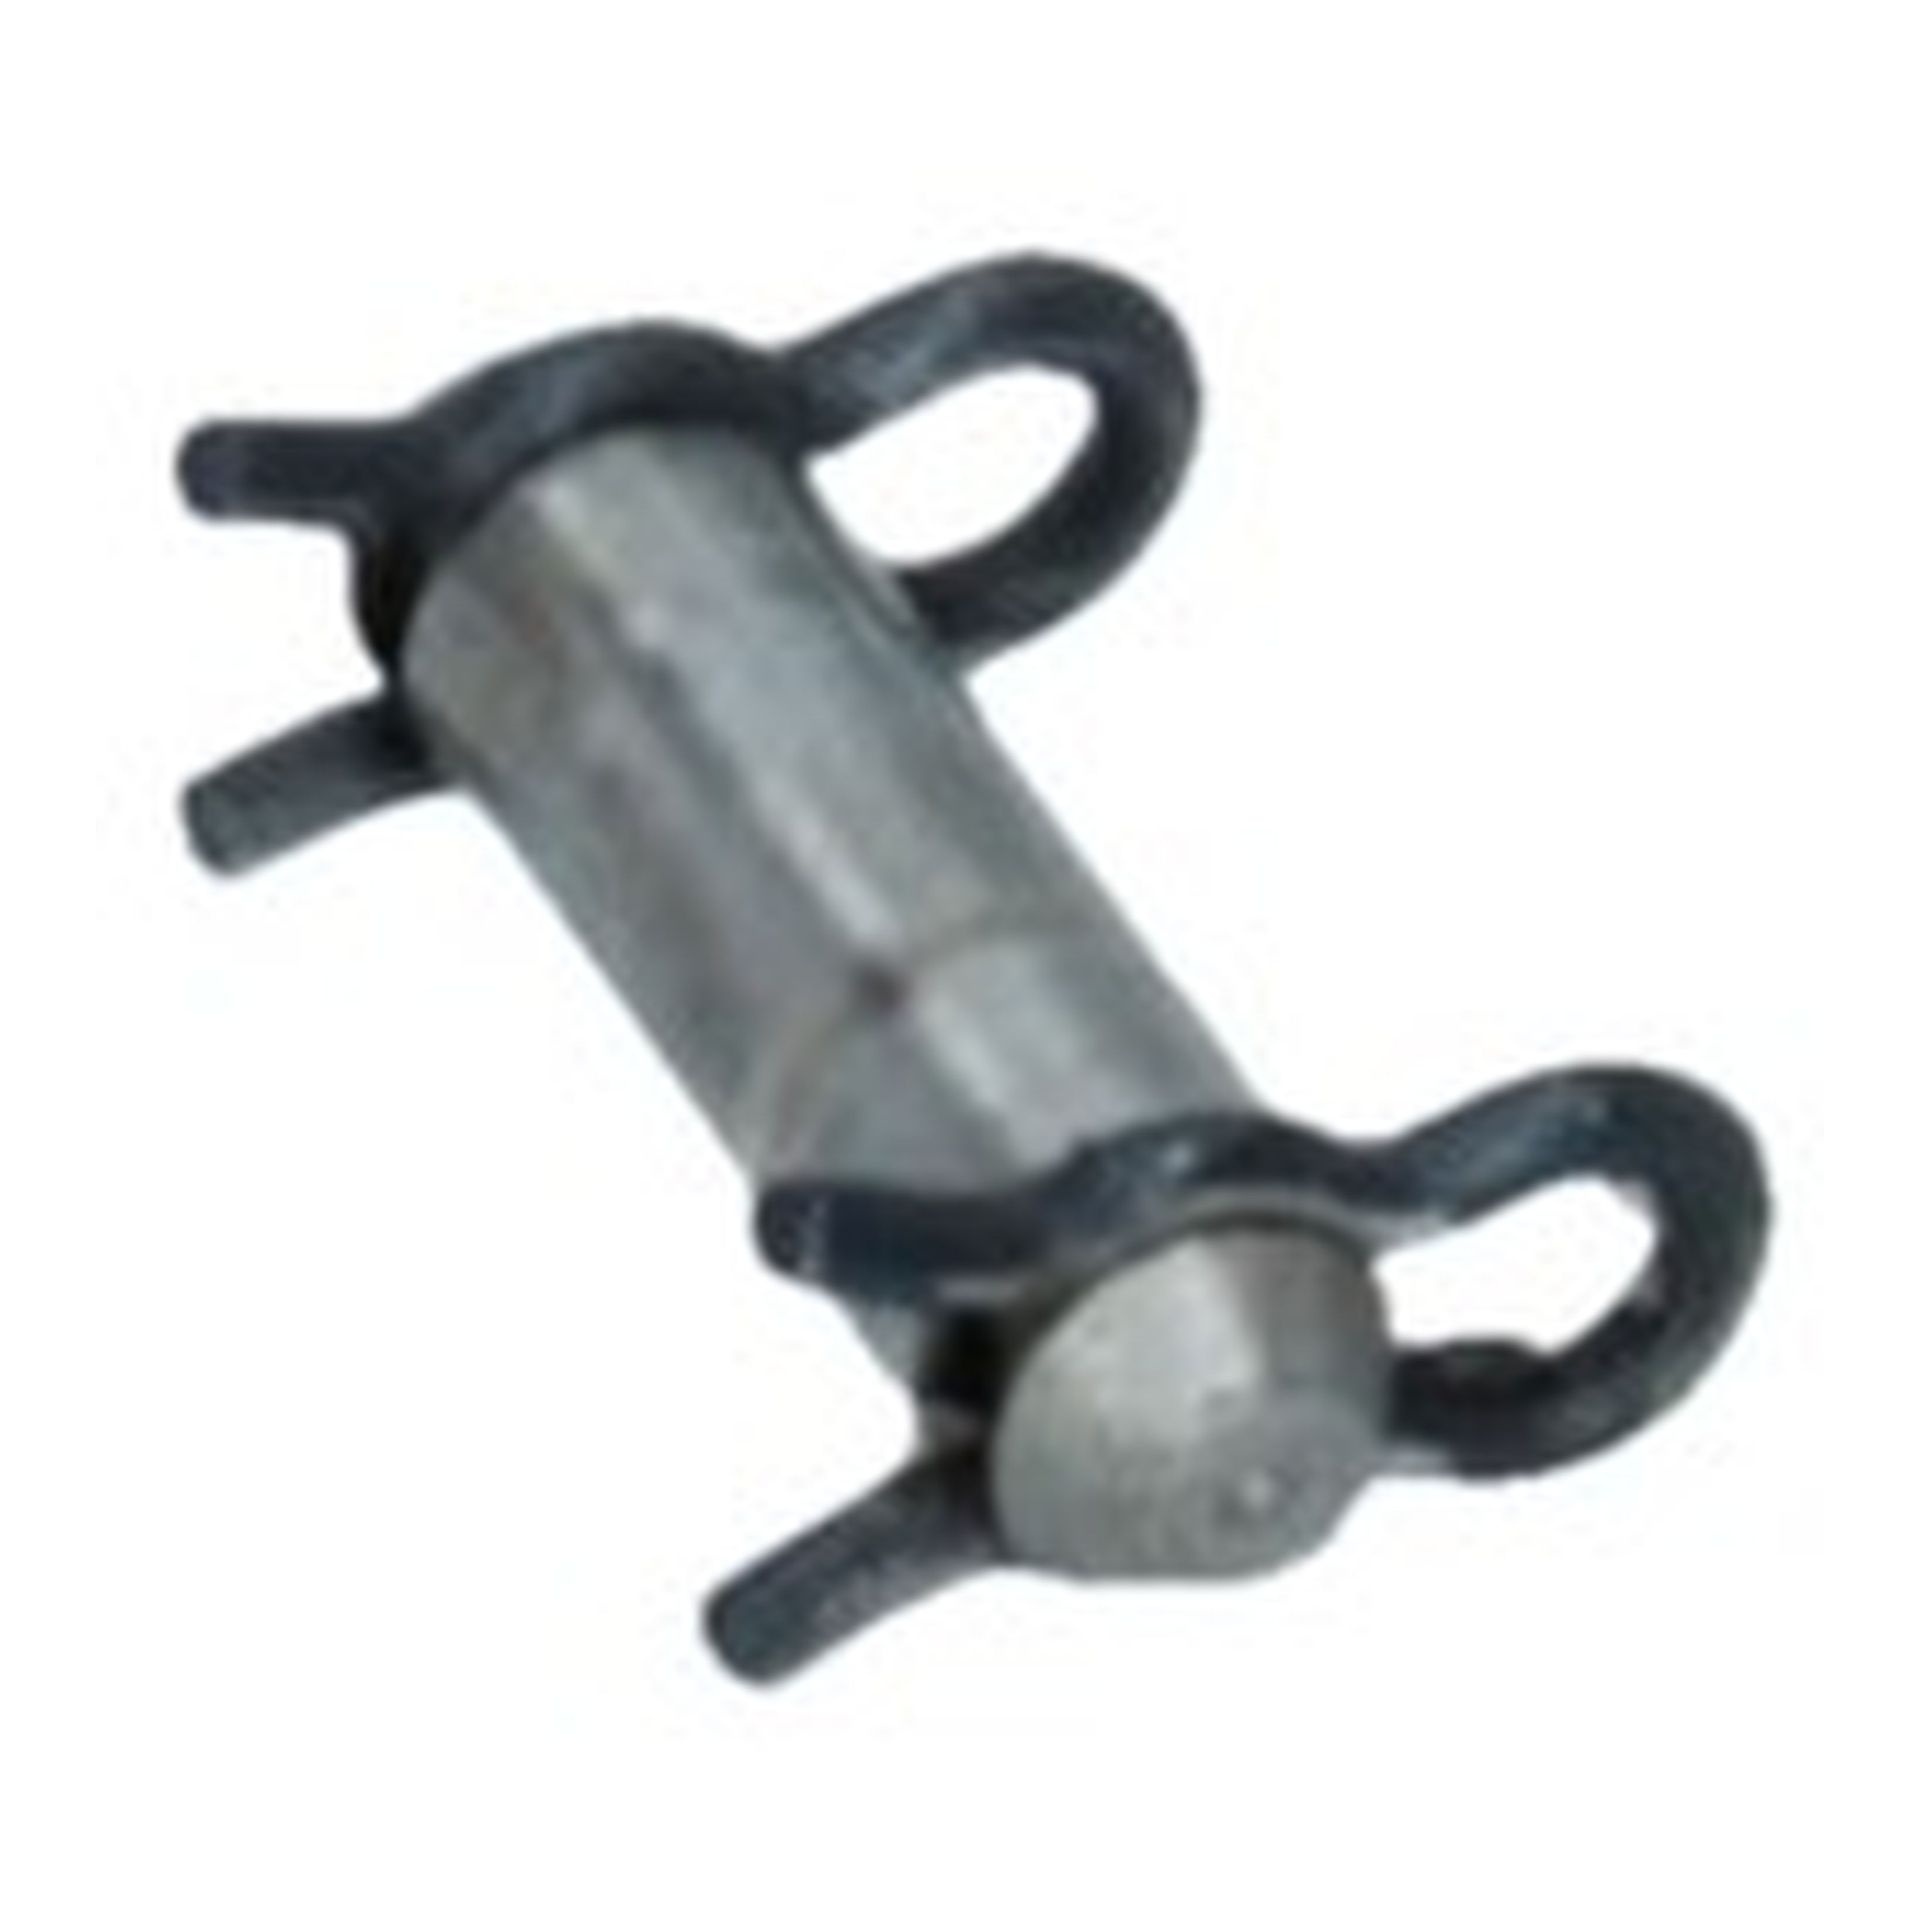 Mechanical Fuel Pump Link Pin with Clips